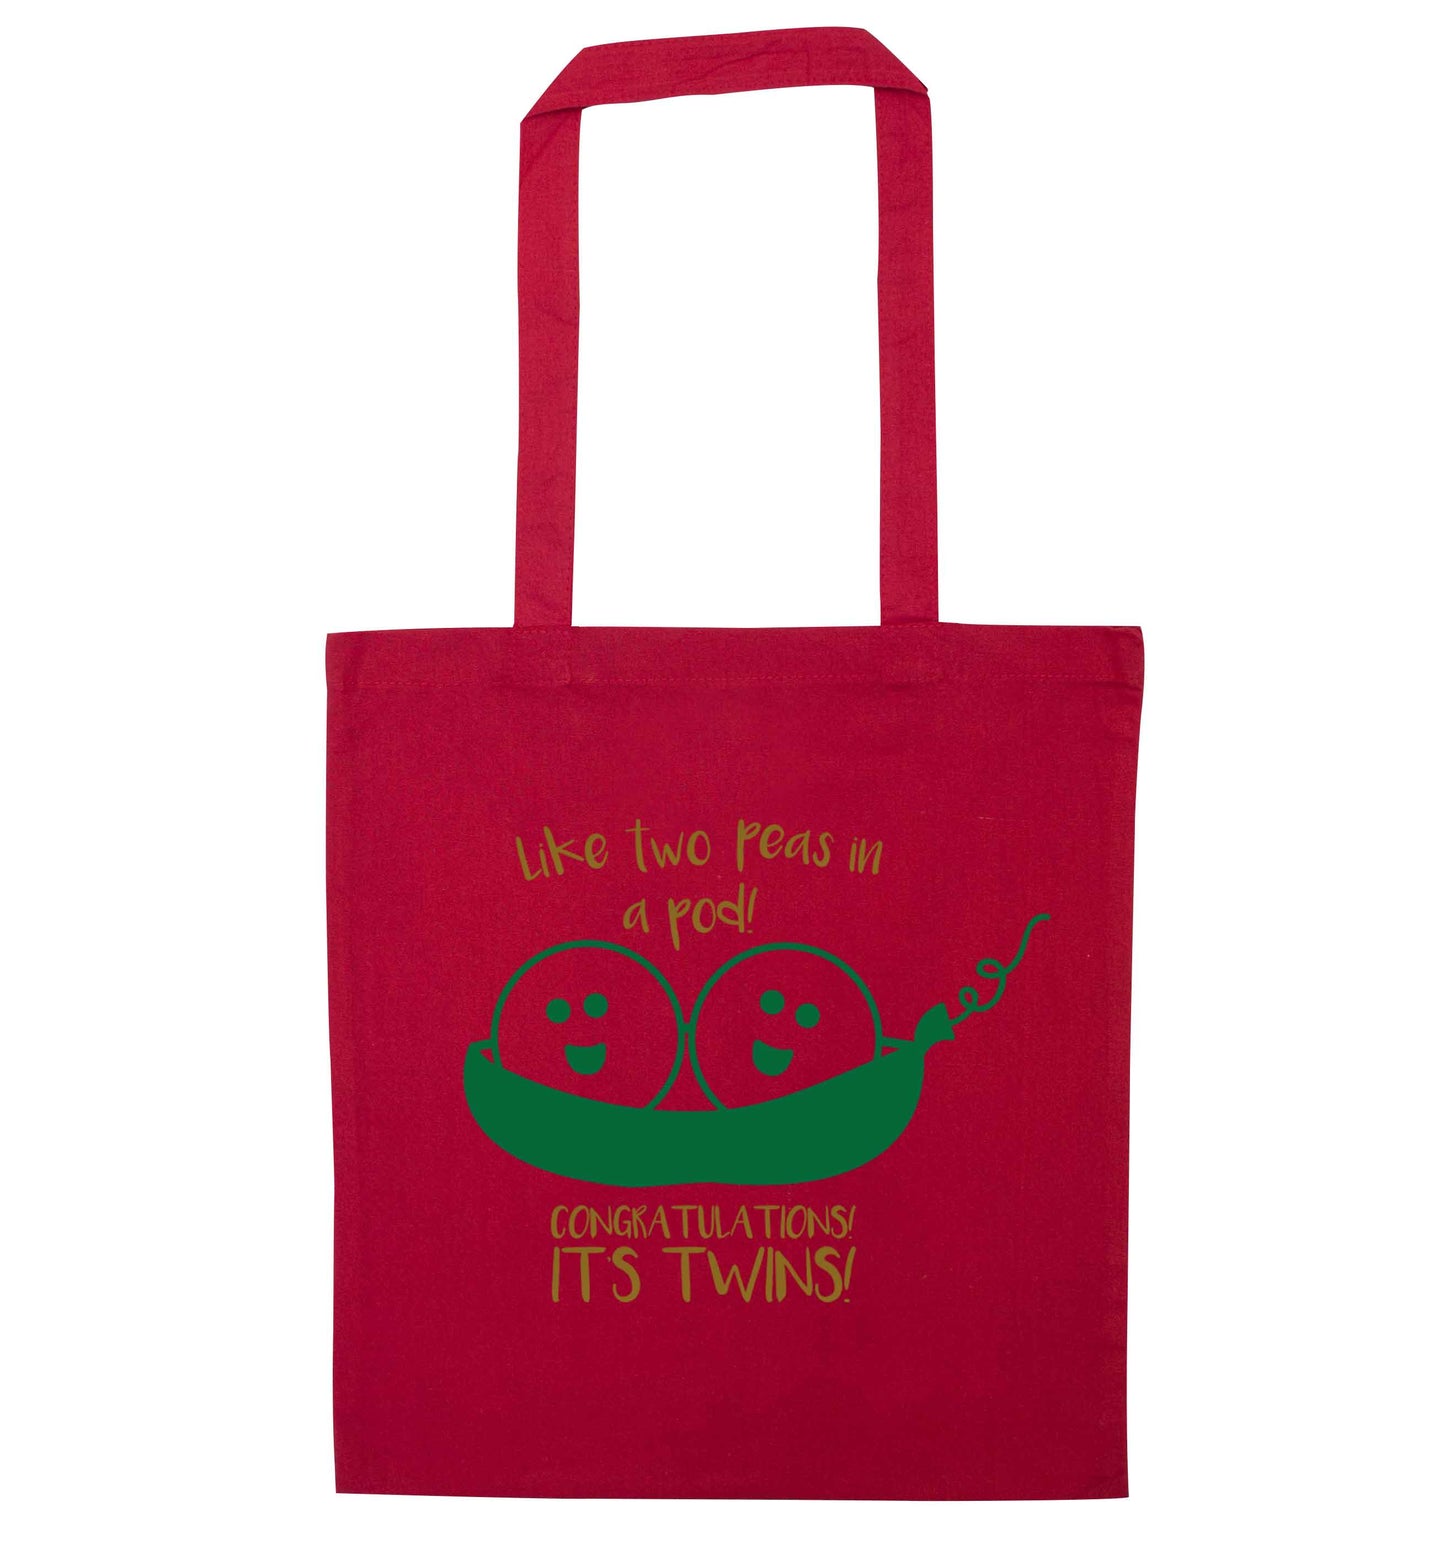 Like two peas in a pod! Congratulations it's twins! red tote bag